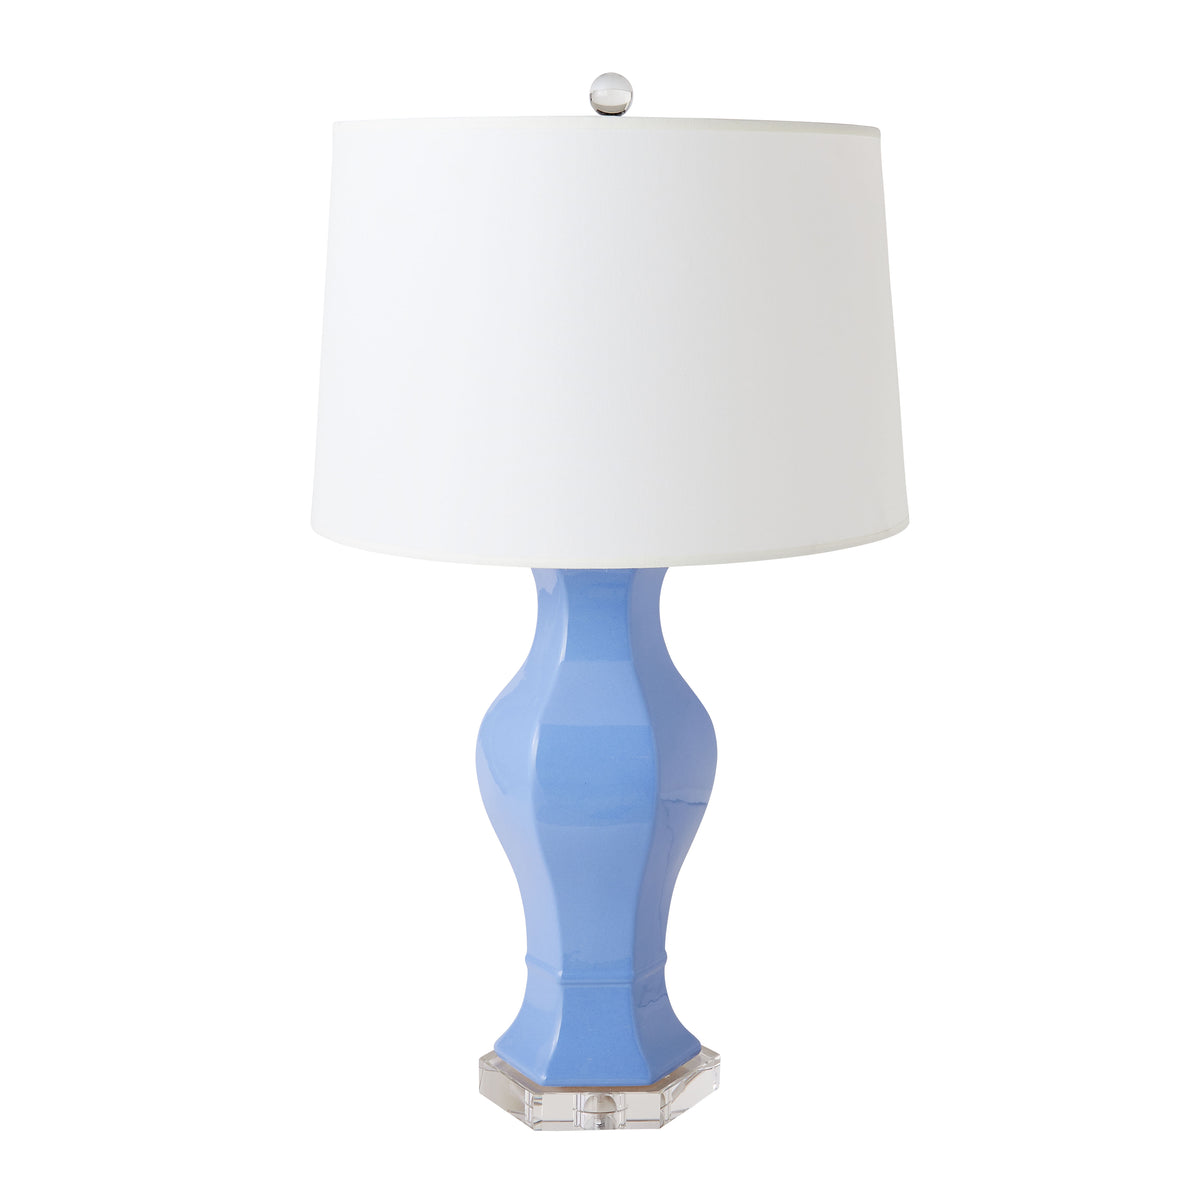 Chloé Lamp in French Blue